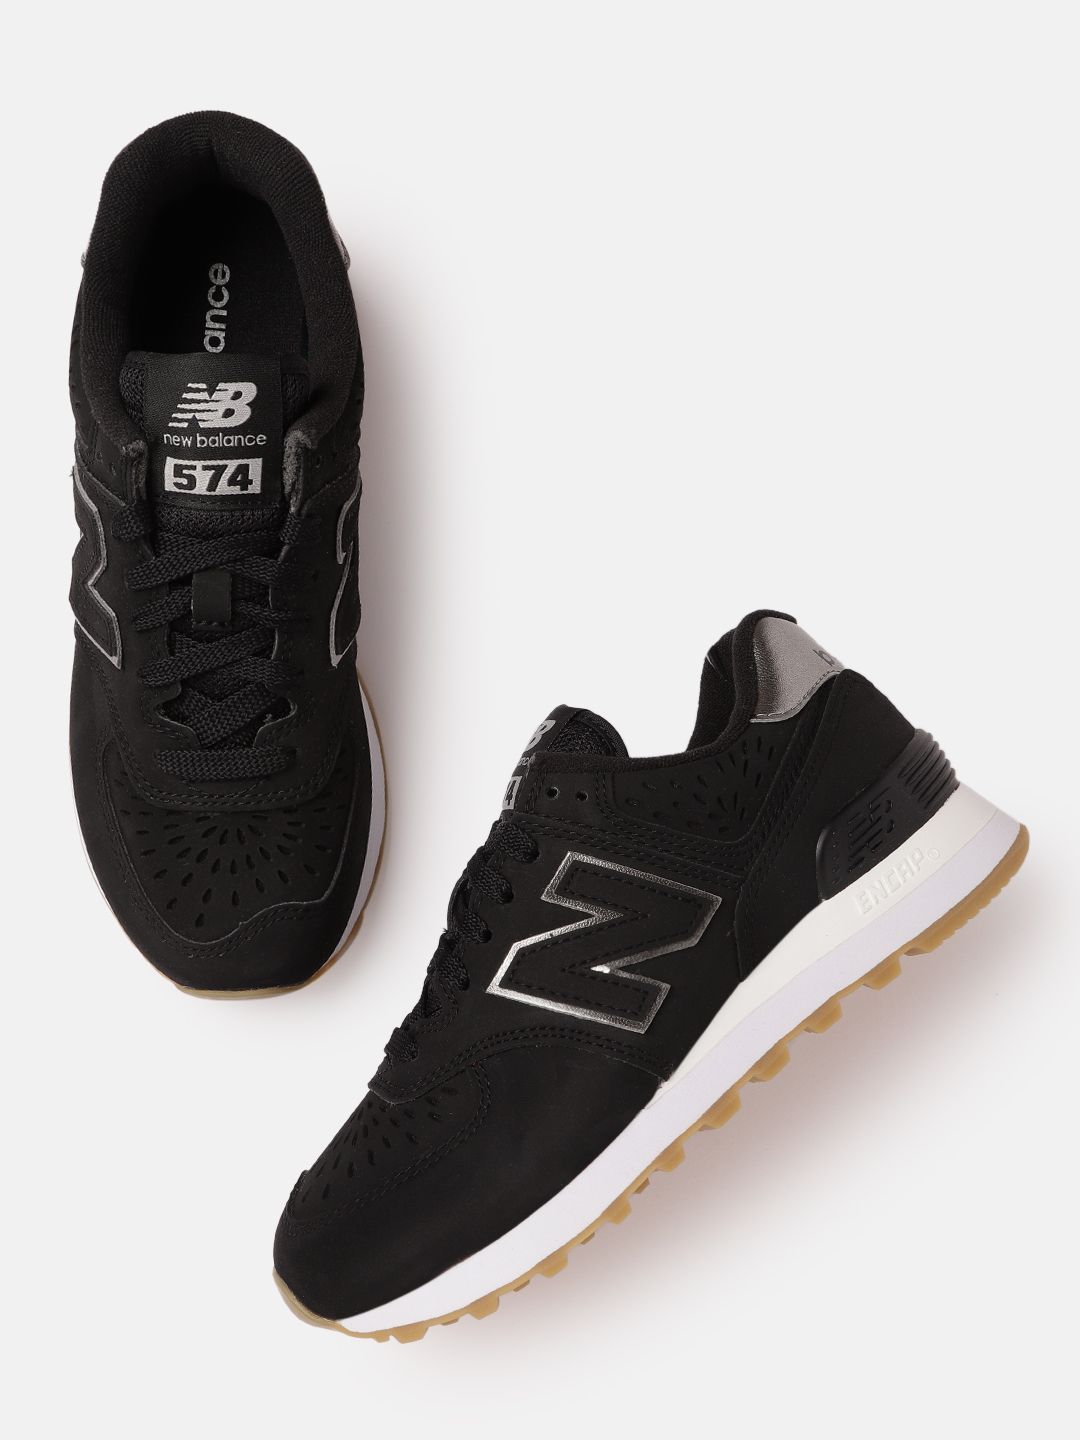 New Balance Women Black Perforations Sneakers Price in India